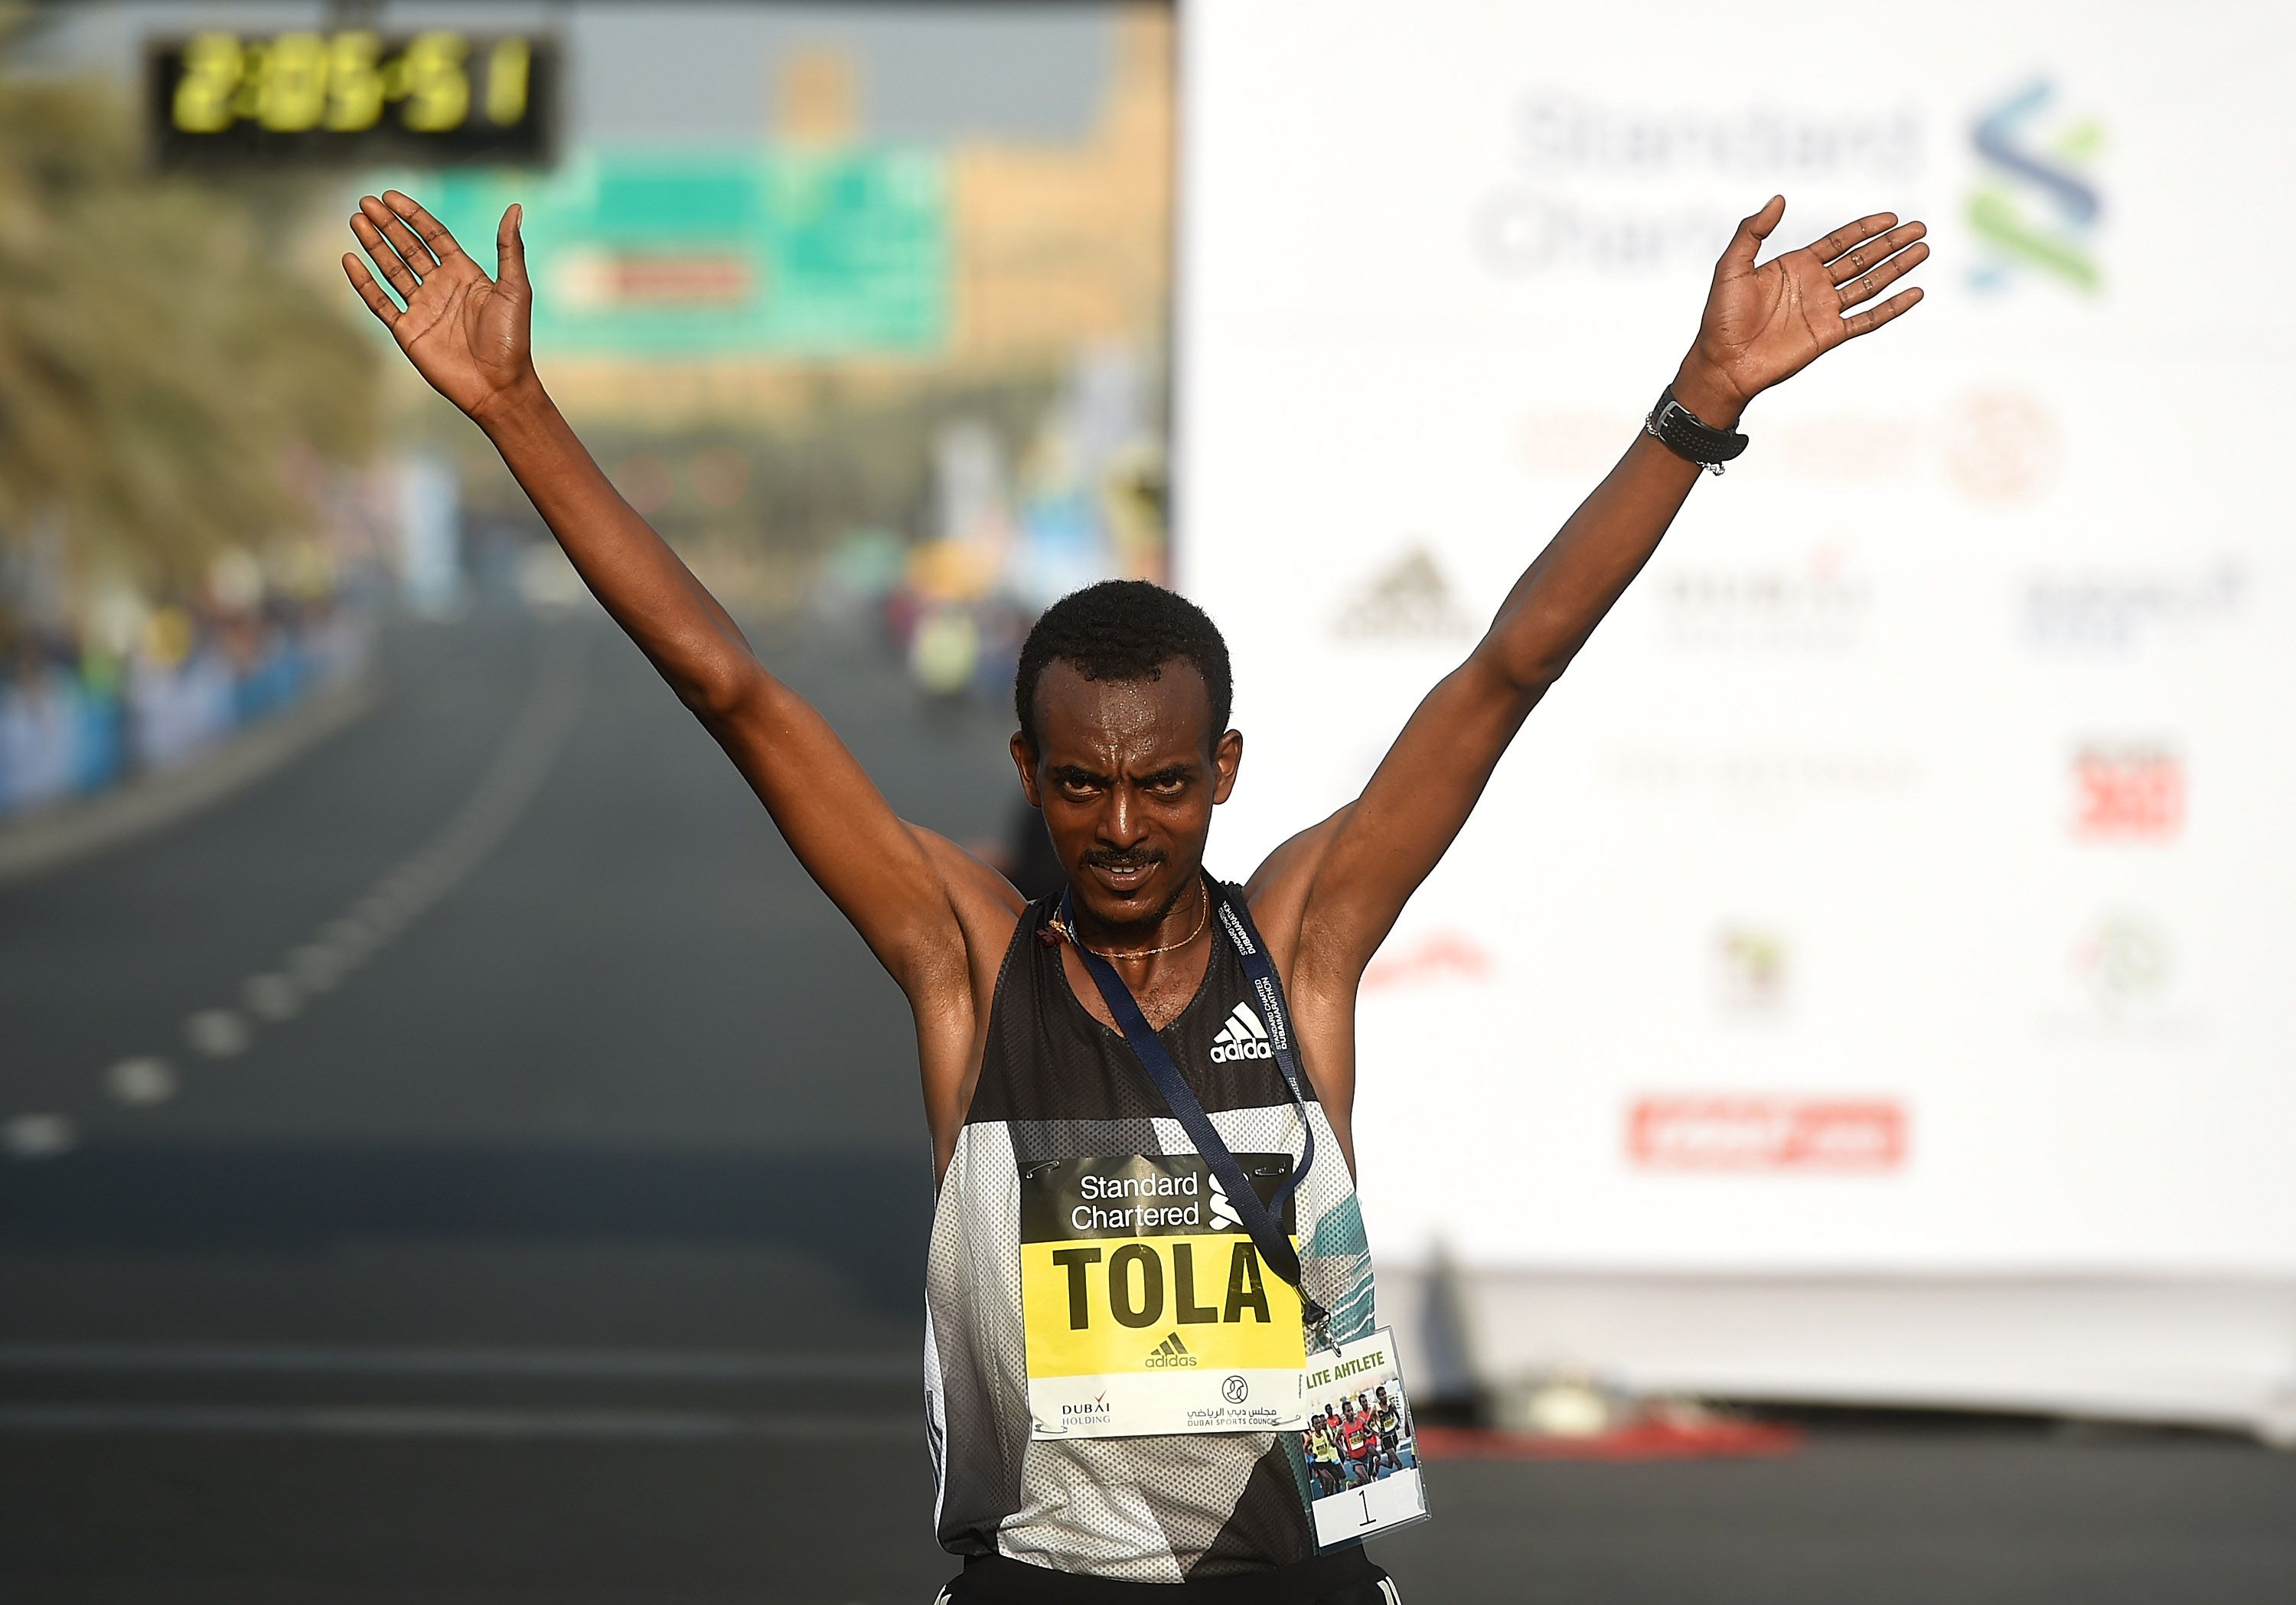 Tola, Gebresilase and Korir attack the record for the marathon in Amsterdam thumbnail